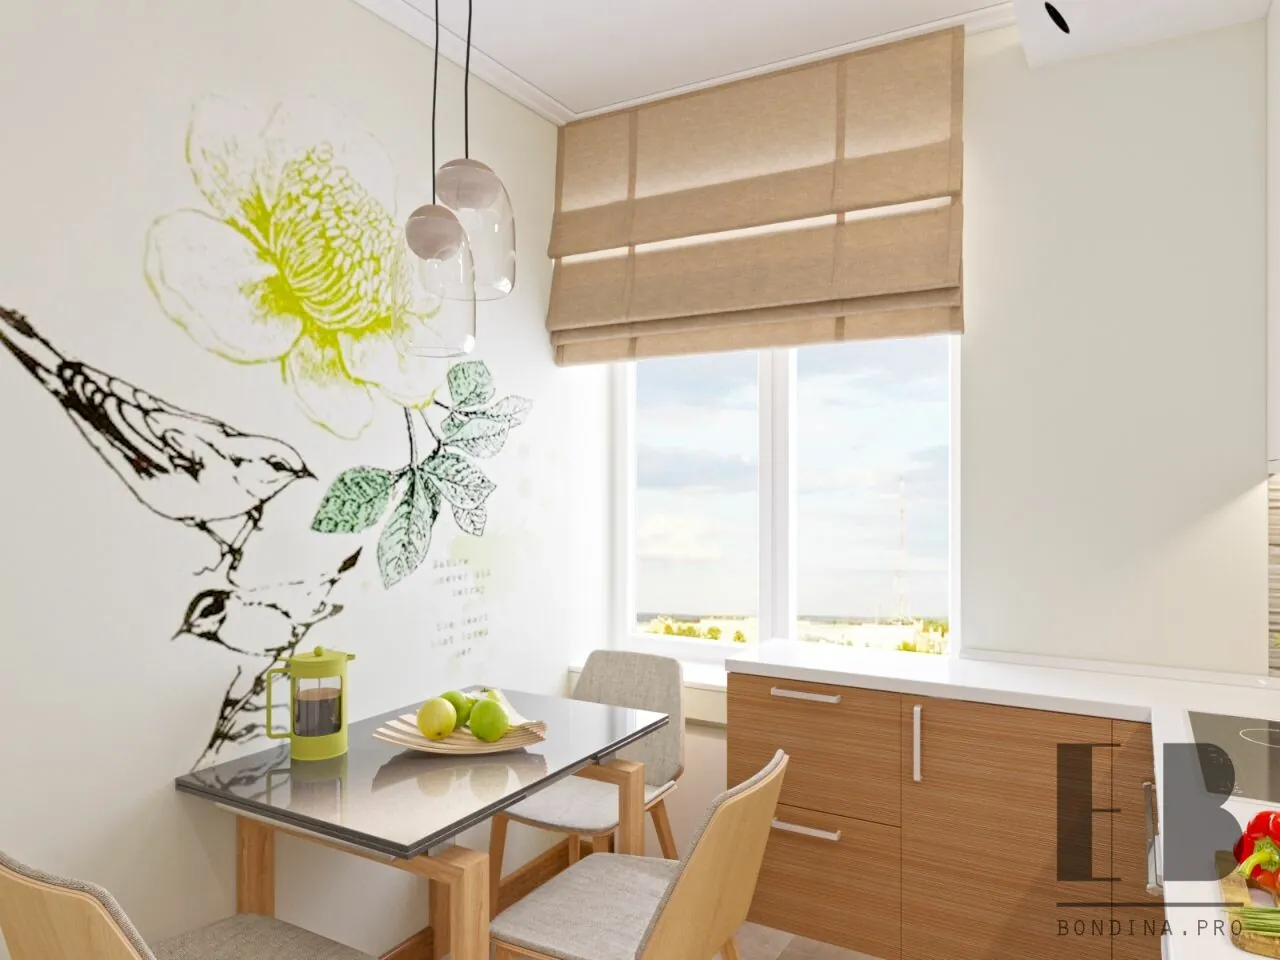 Tender white kitchen with birds and flowers painted on the wall, a glass table, wooden cabinets and roman curtains